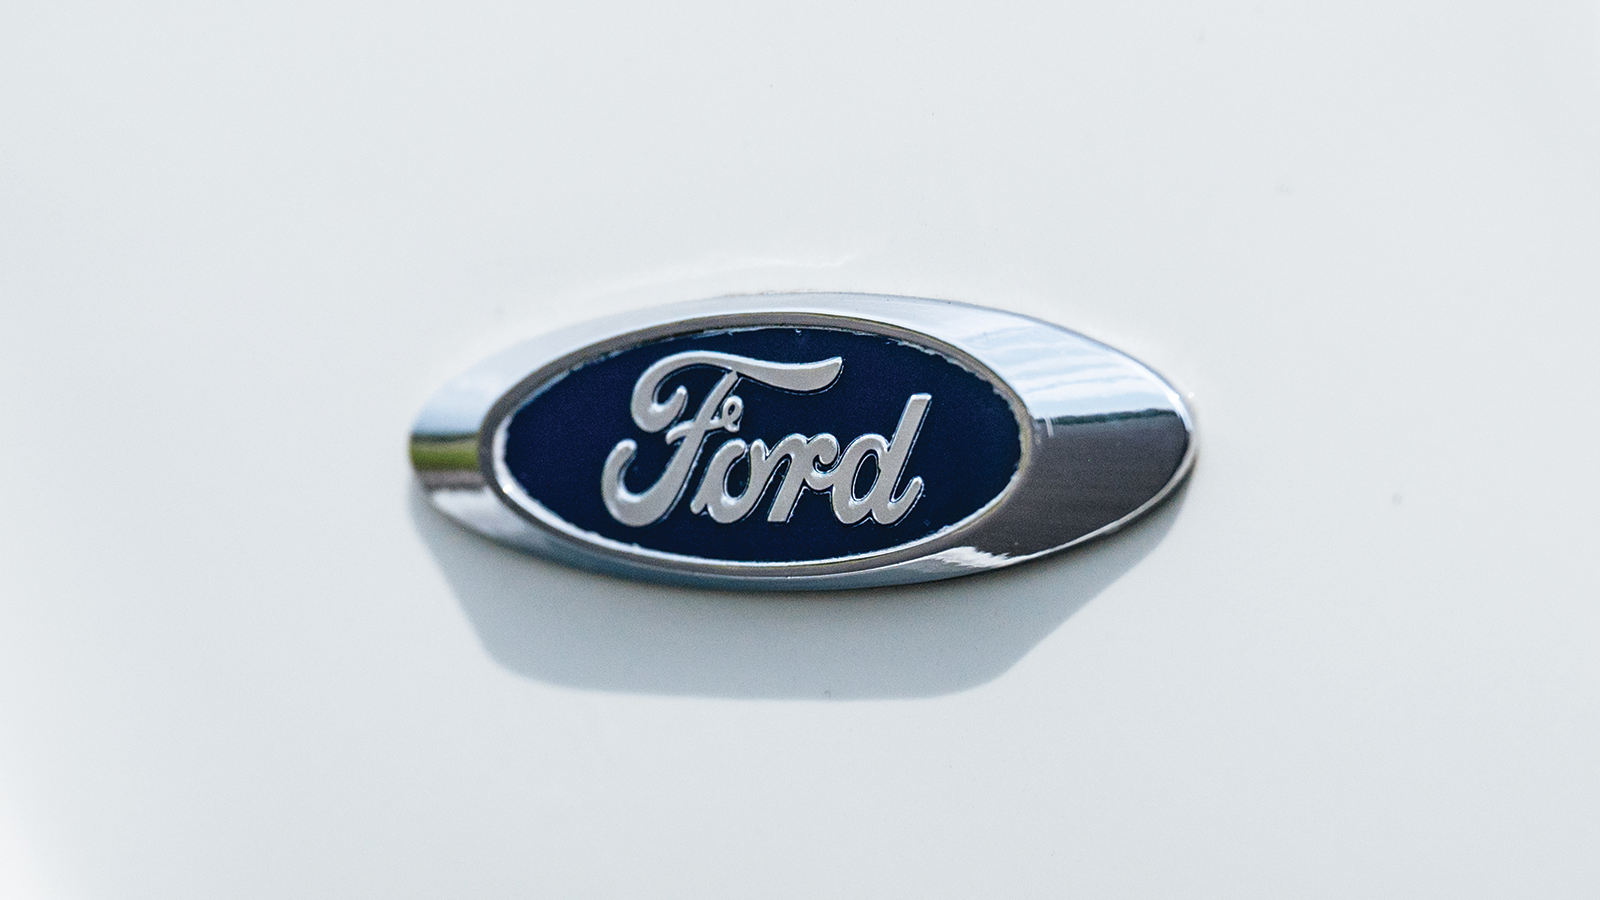 60 years of Fast Fords